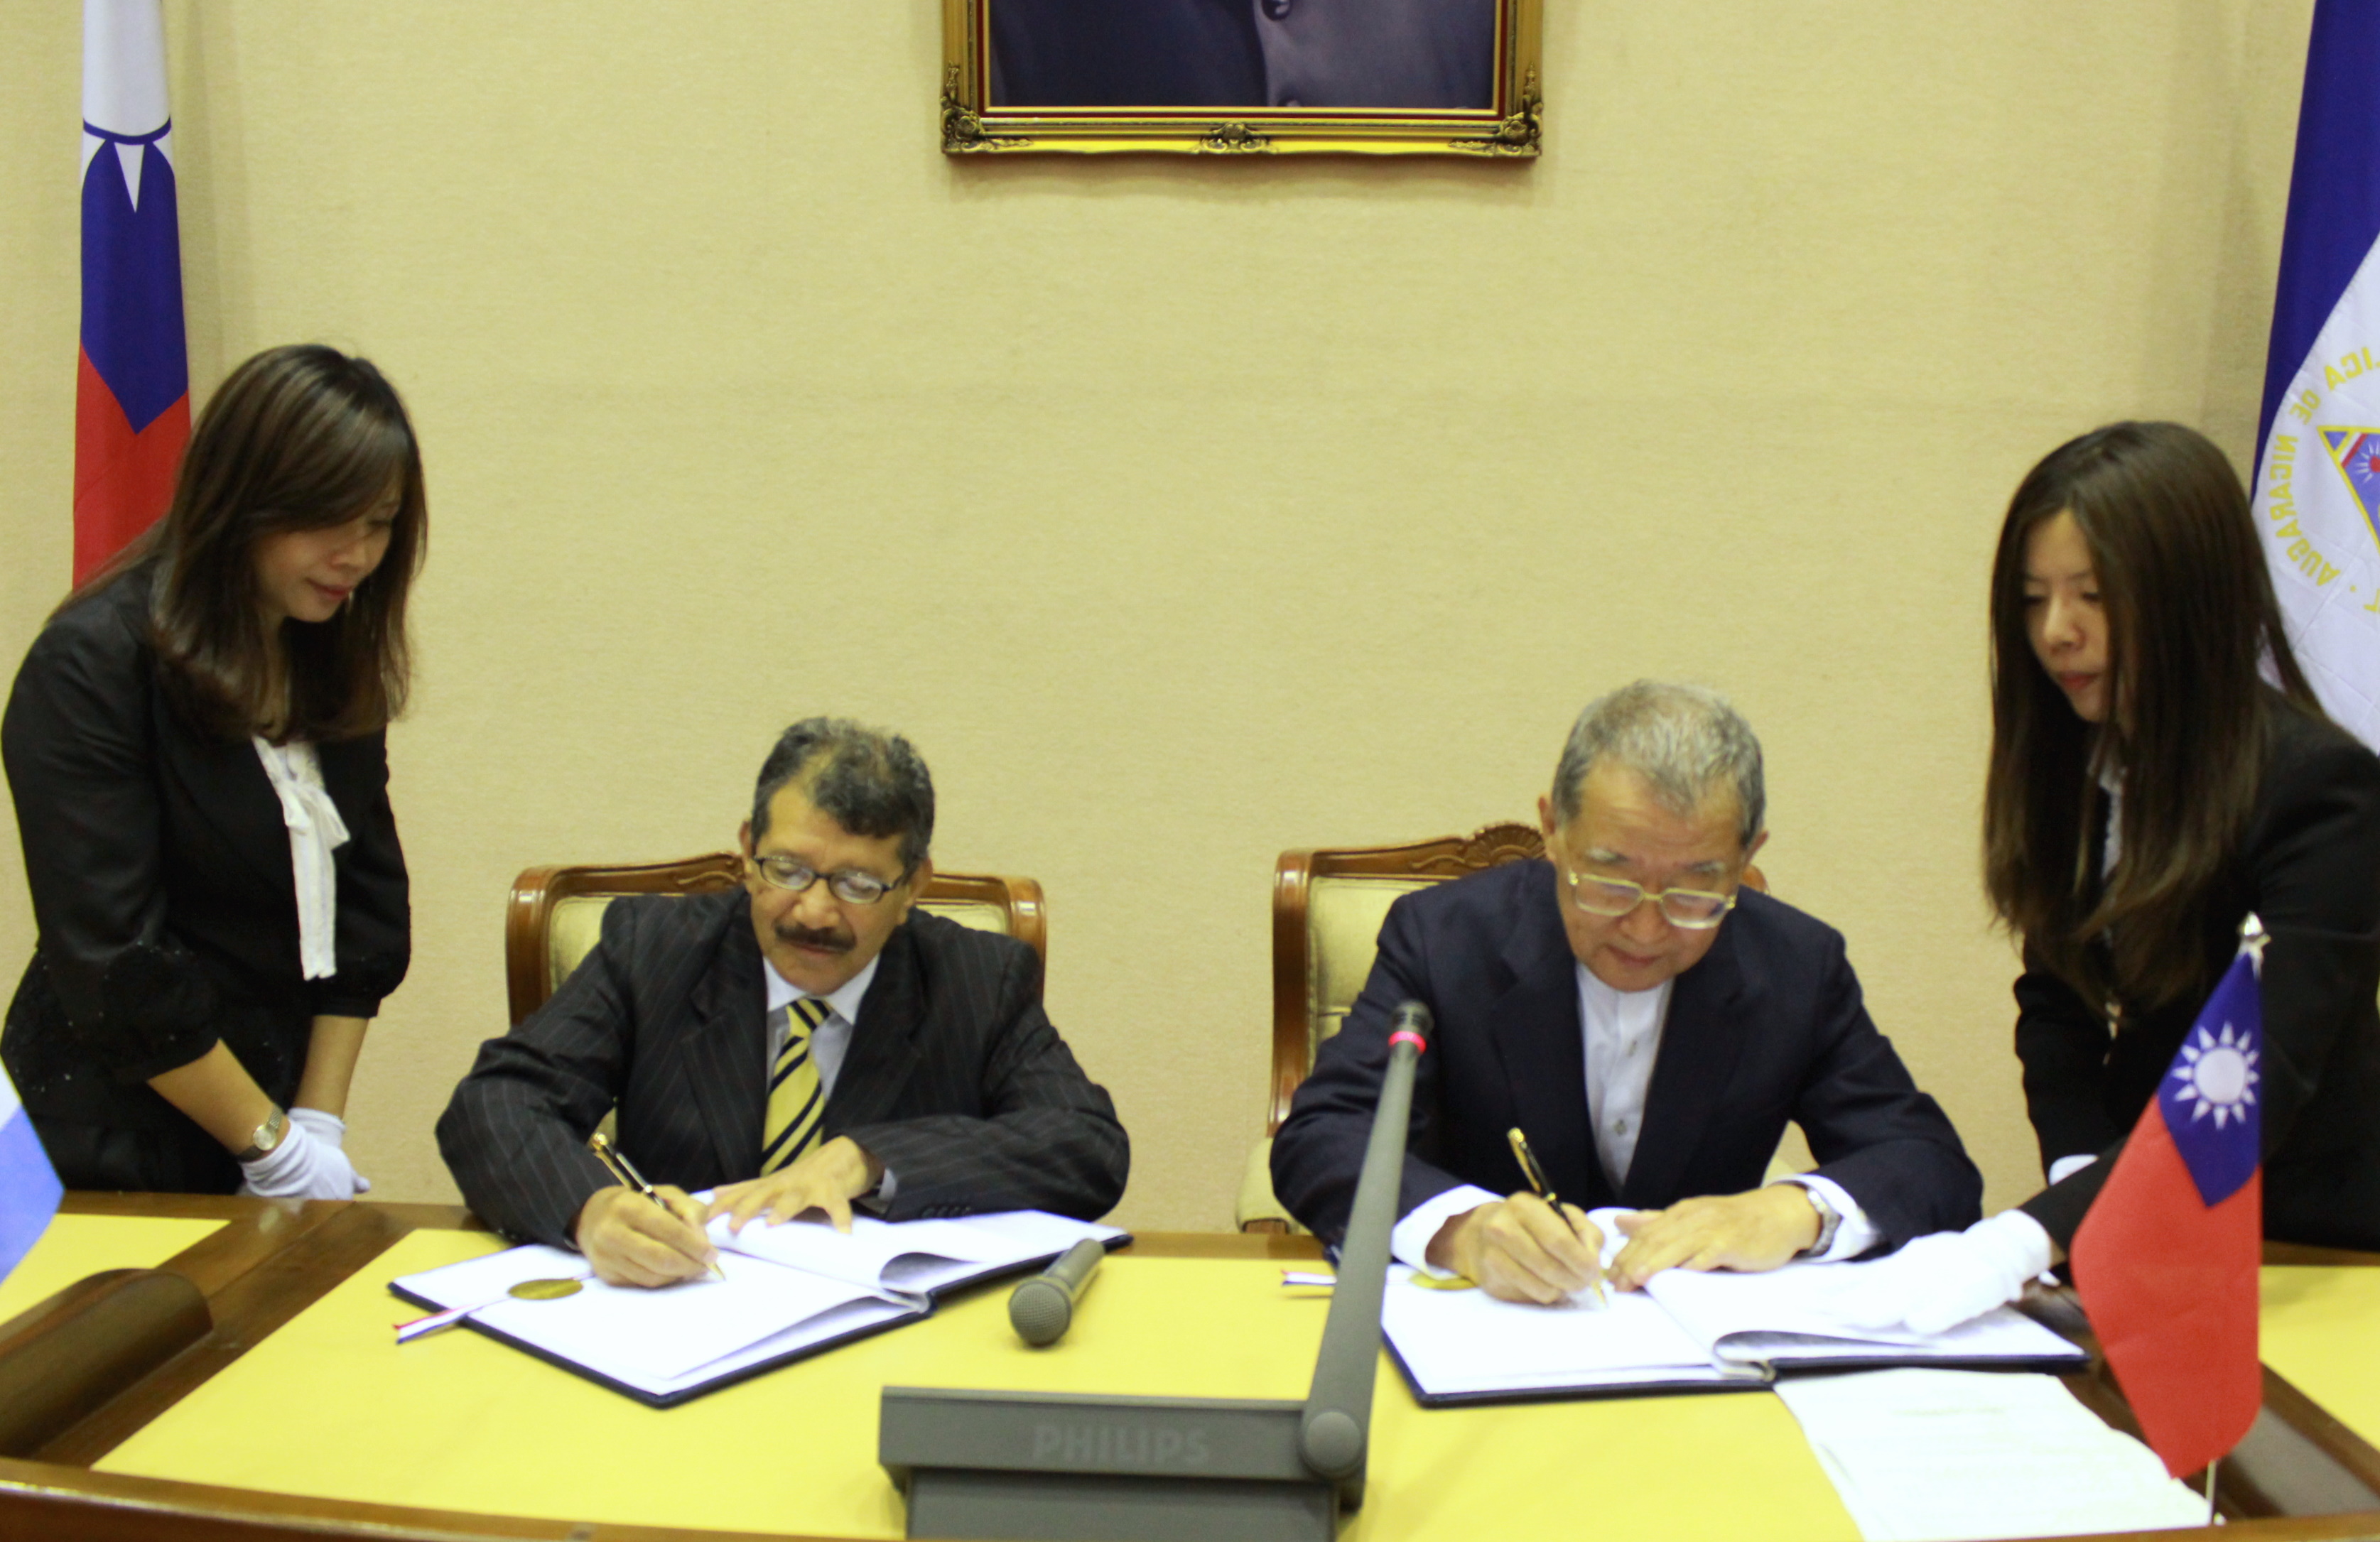 agreement signing ceremony